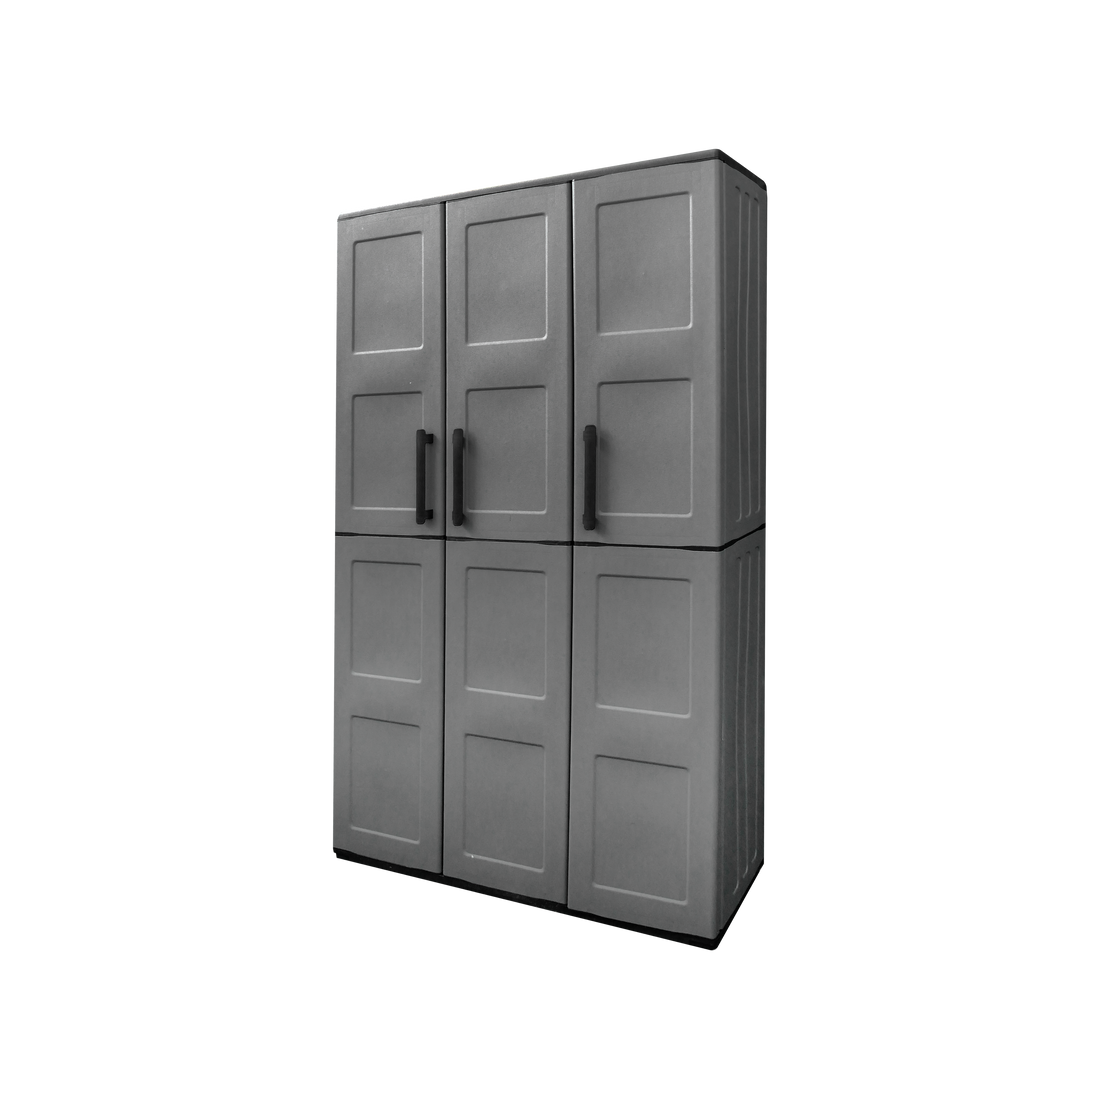 FREE HIGH CABINET 3 DOORS W102xD37xH163CM RECYCLED POLYPROPYLENE